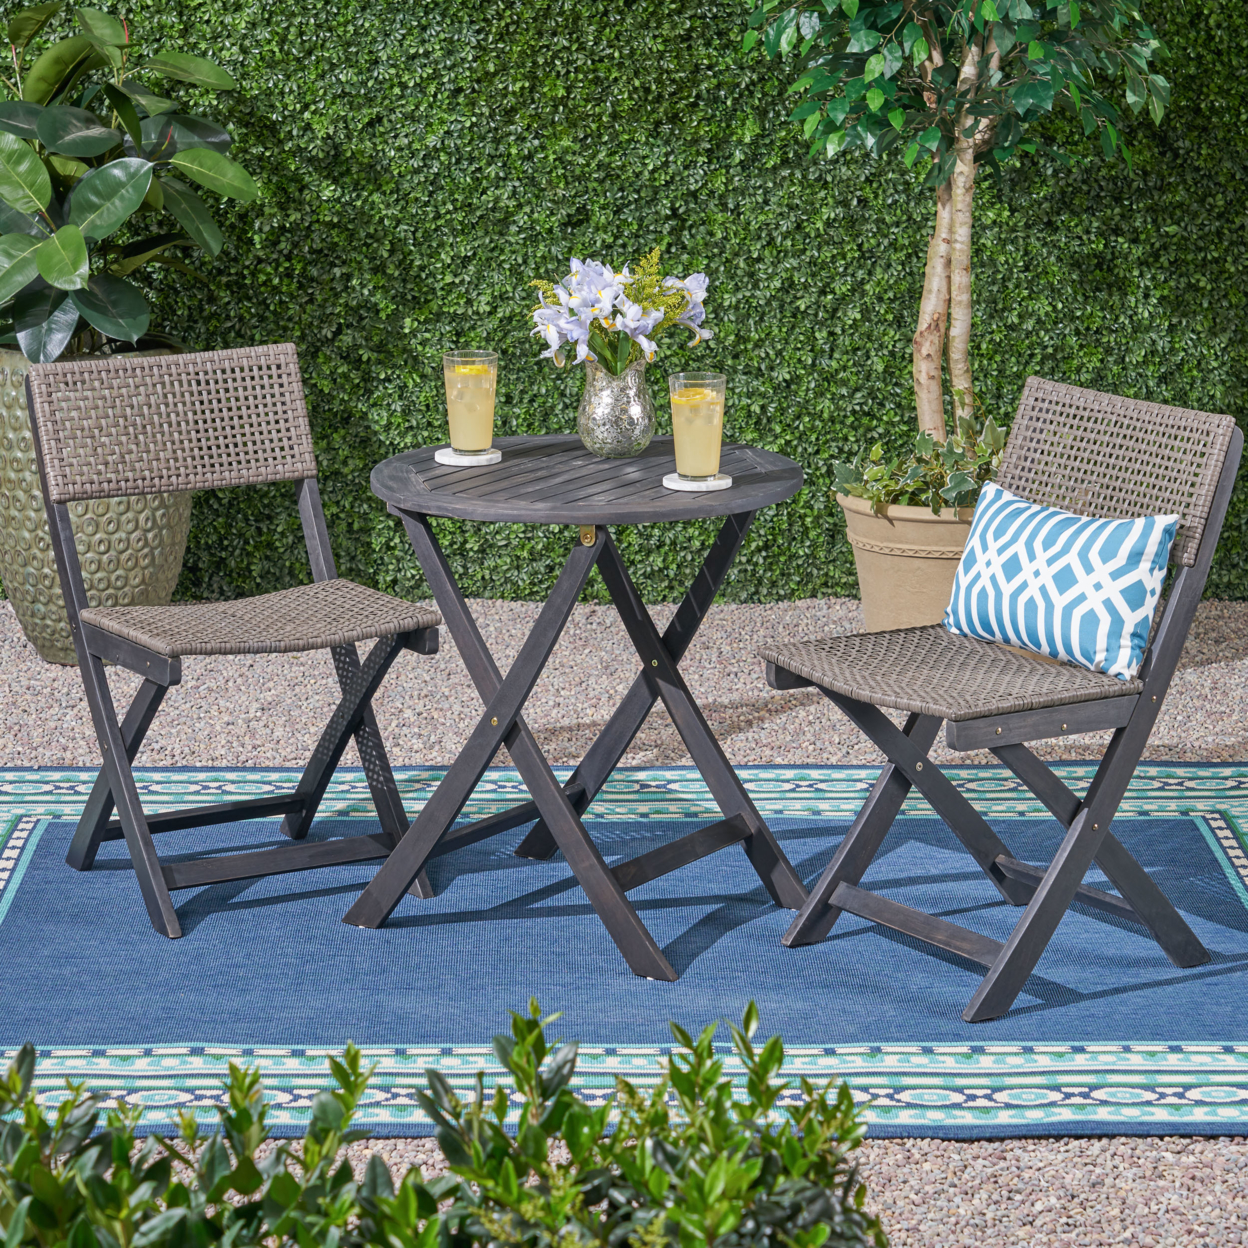 Ida Outdoor Acacia Wood Wicker Foldable Bistro Set With Chairs And Table - Dark Gray + Brown Wicker